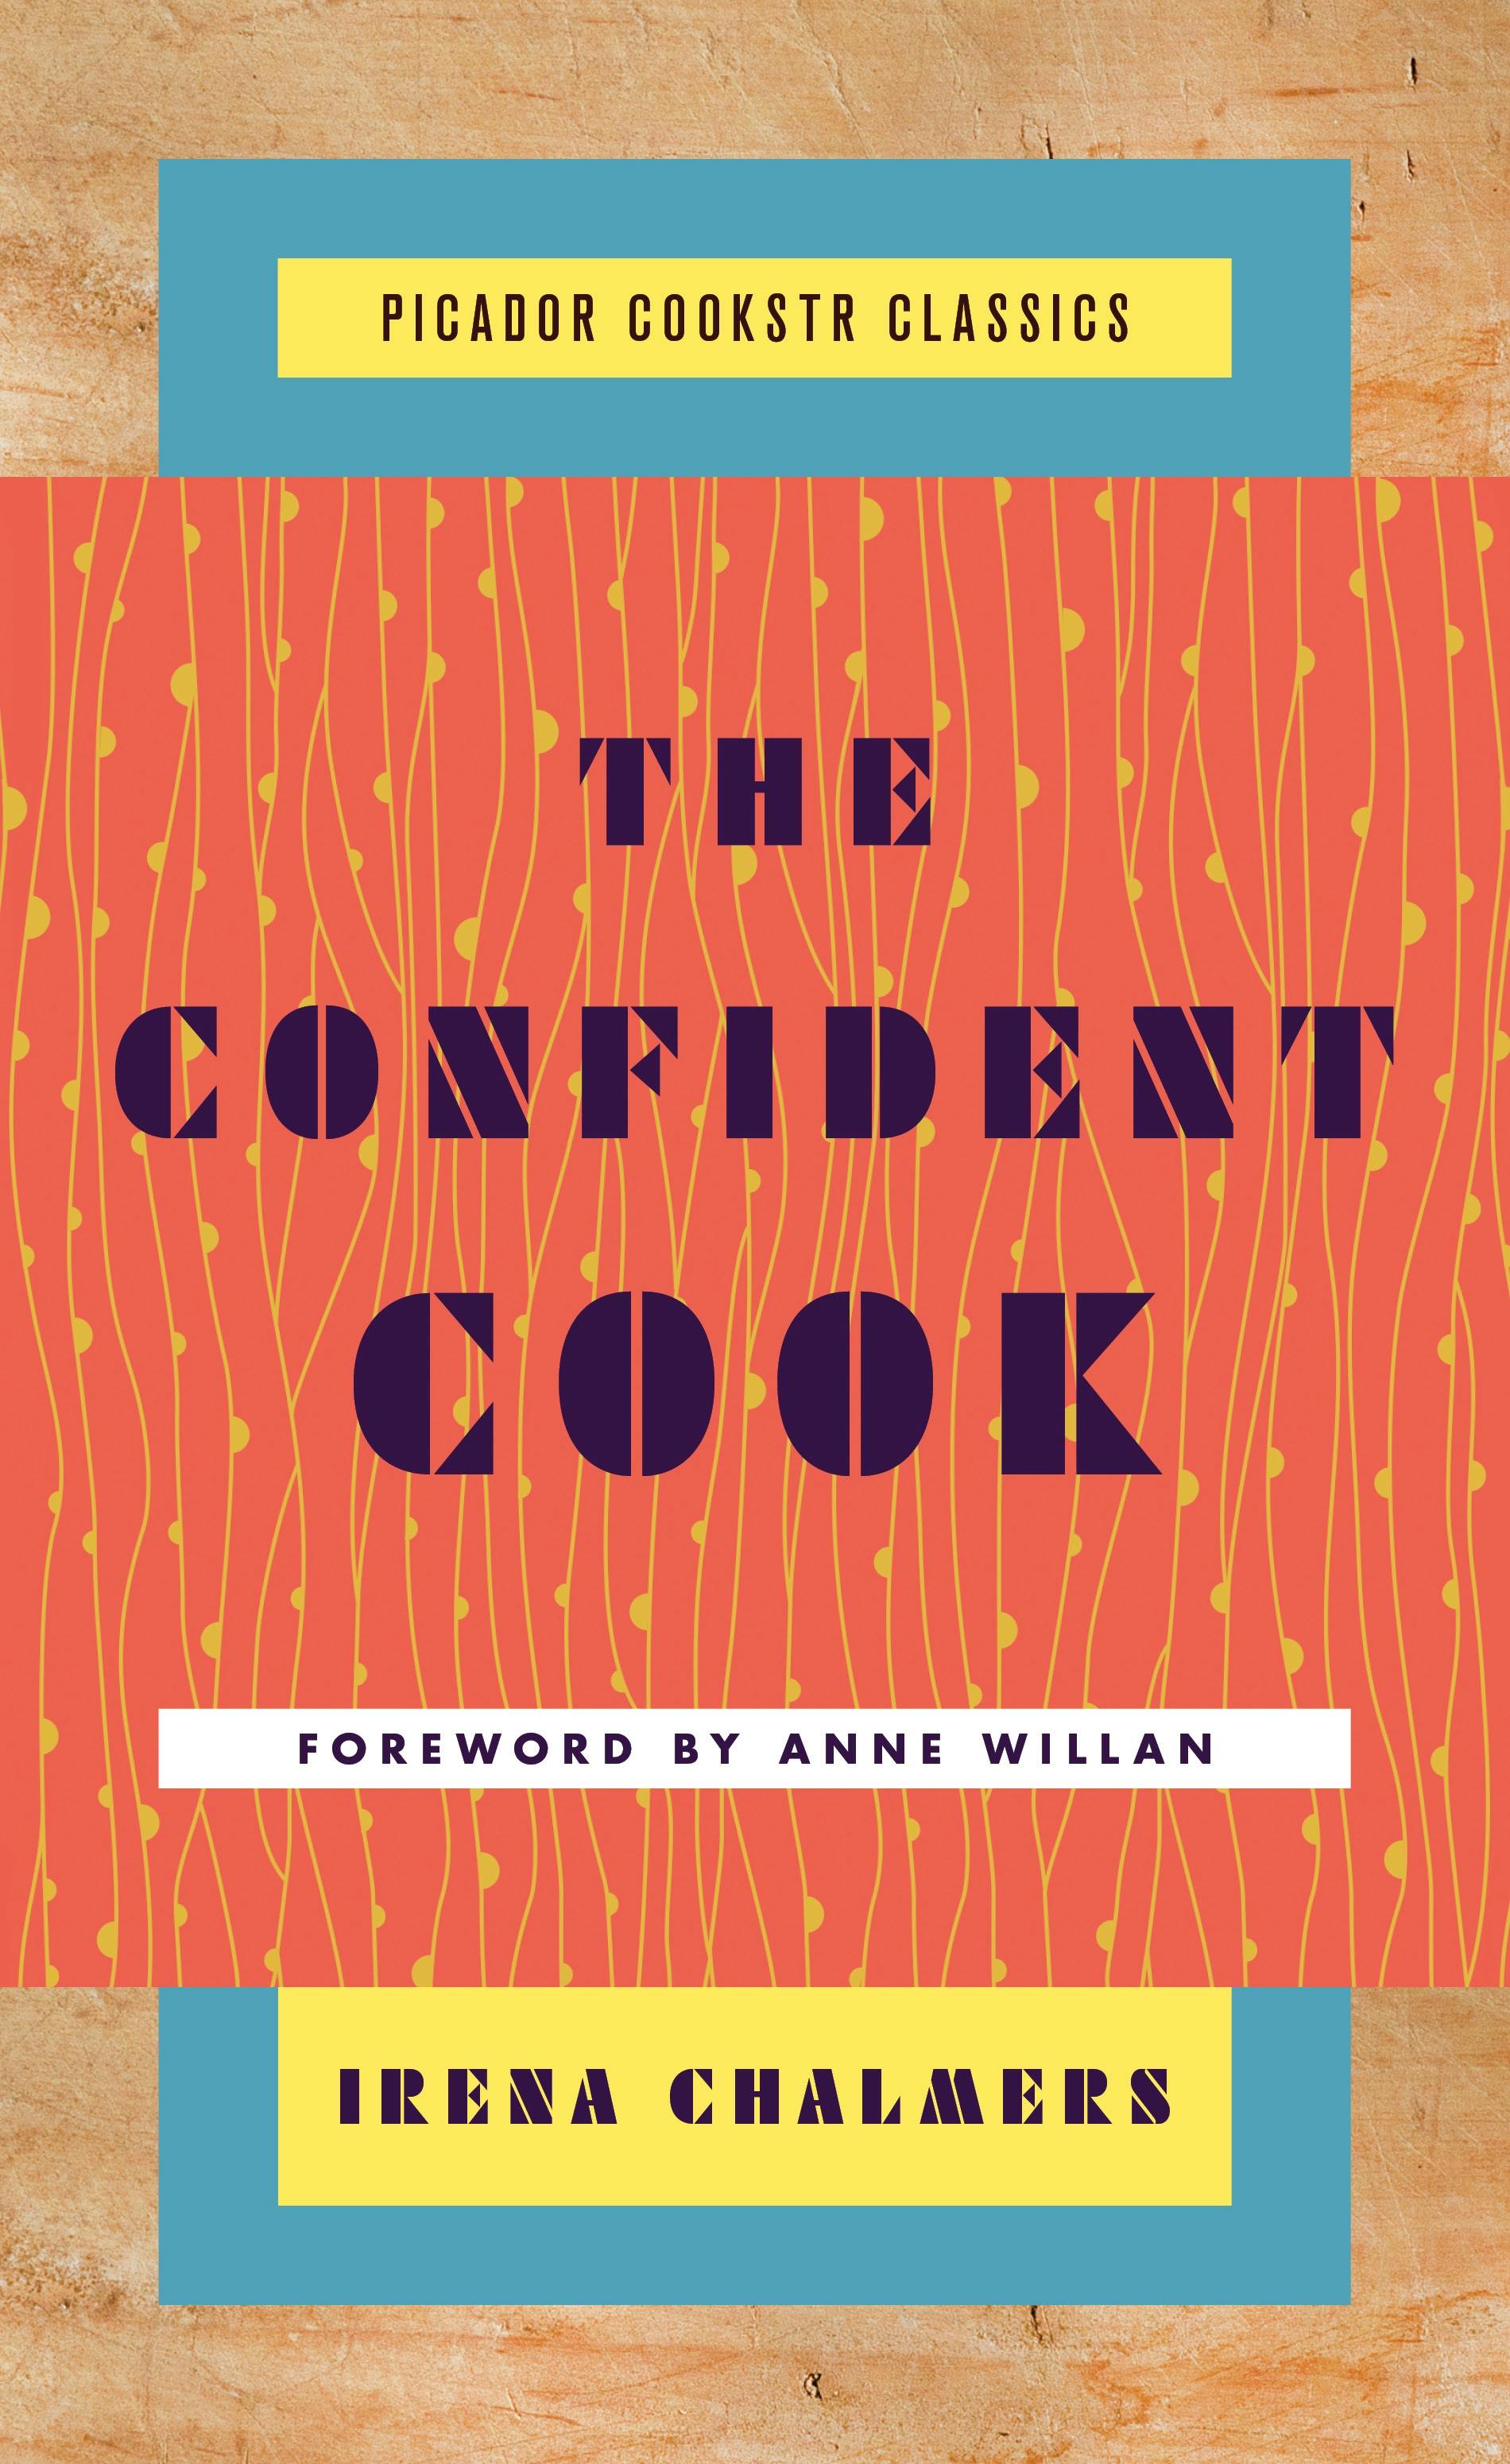 The Confident Cook